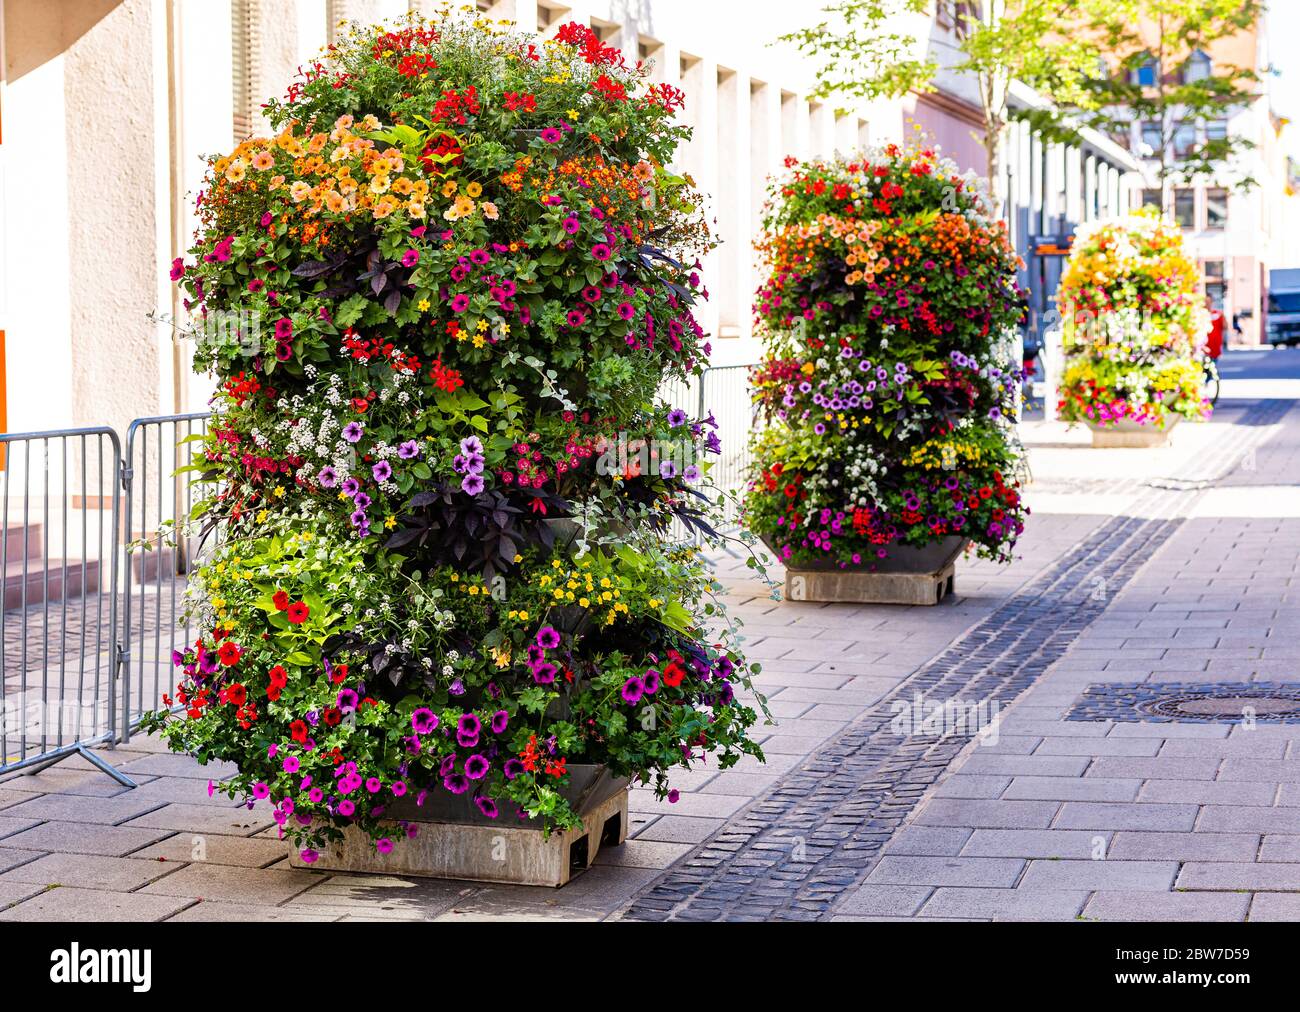 Beautiful flower beds. Colorful flowers. Street decoration. Urban architecture. Stock Photo